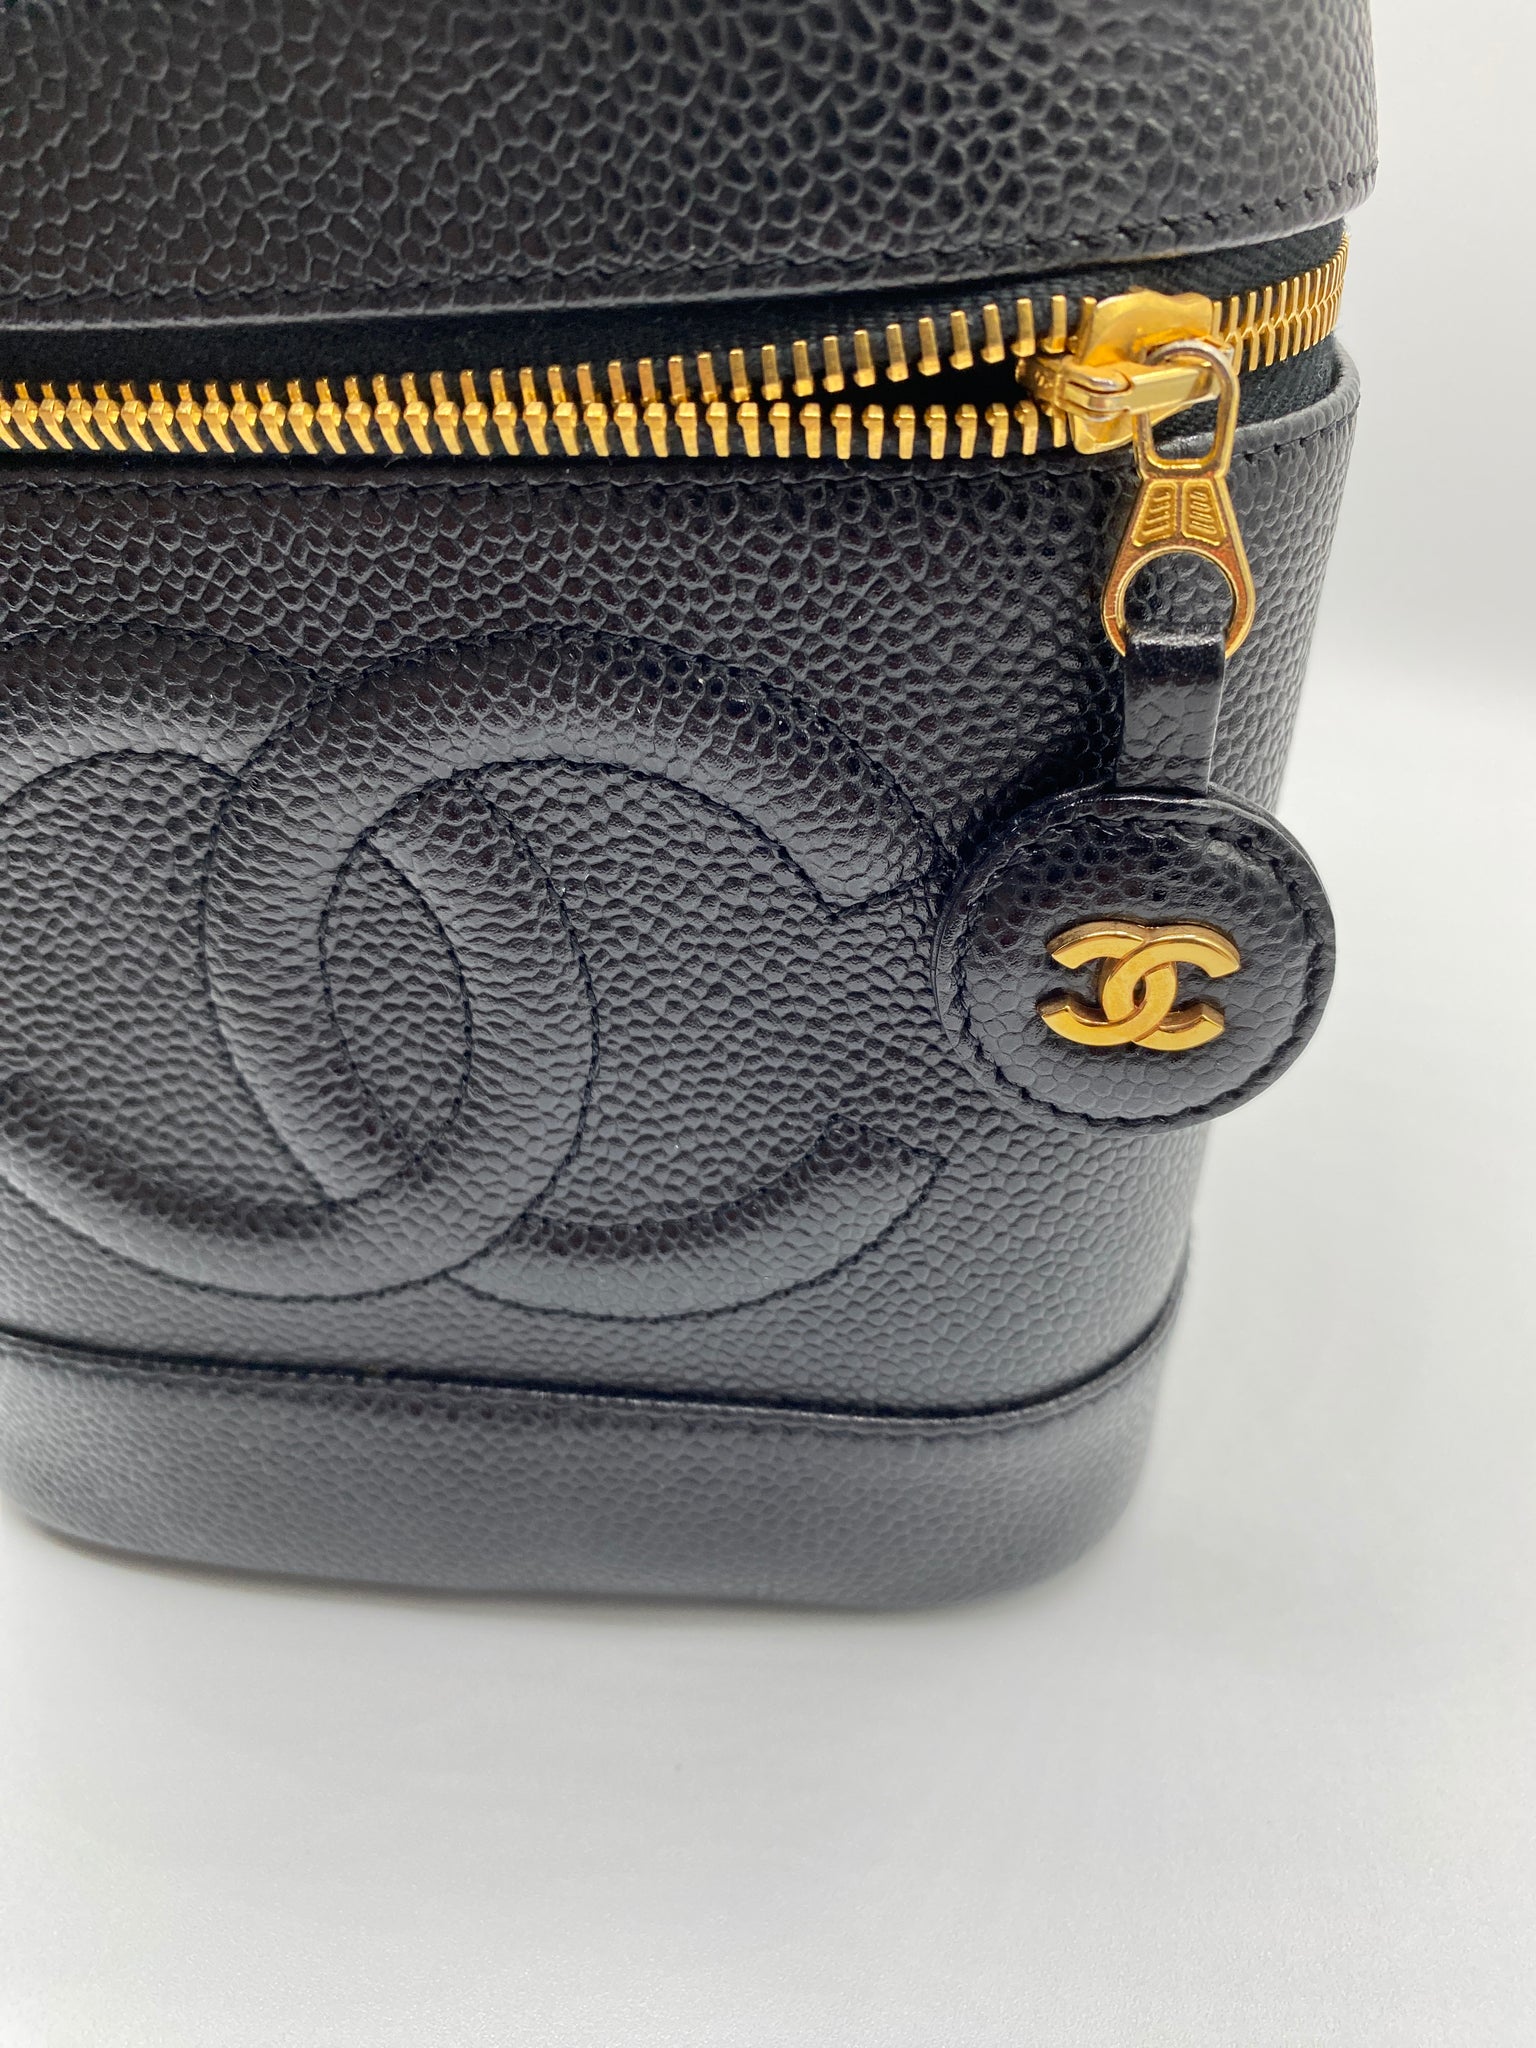 Chanel Caviar Leather Vanity Case Bag With Leather Strap #007